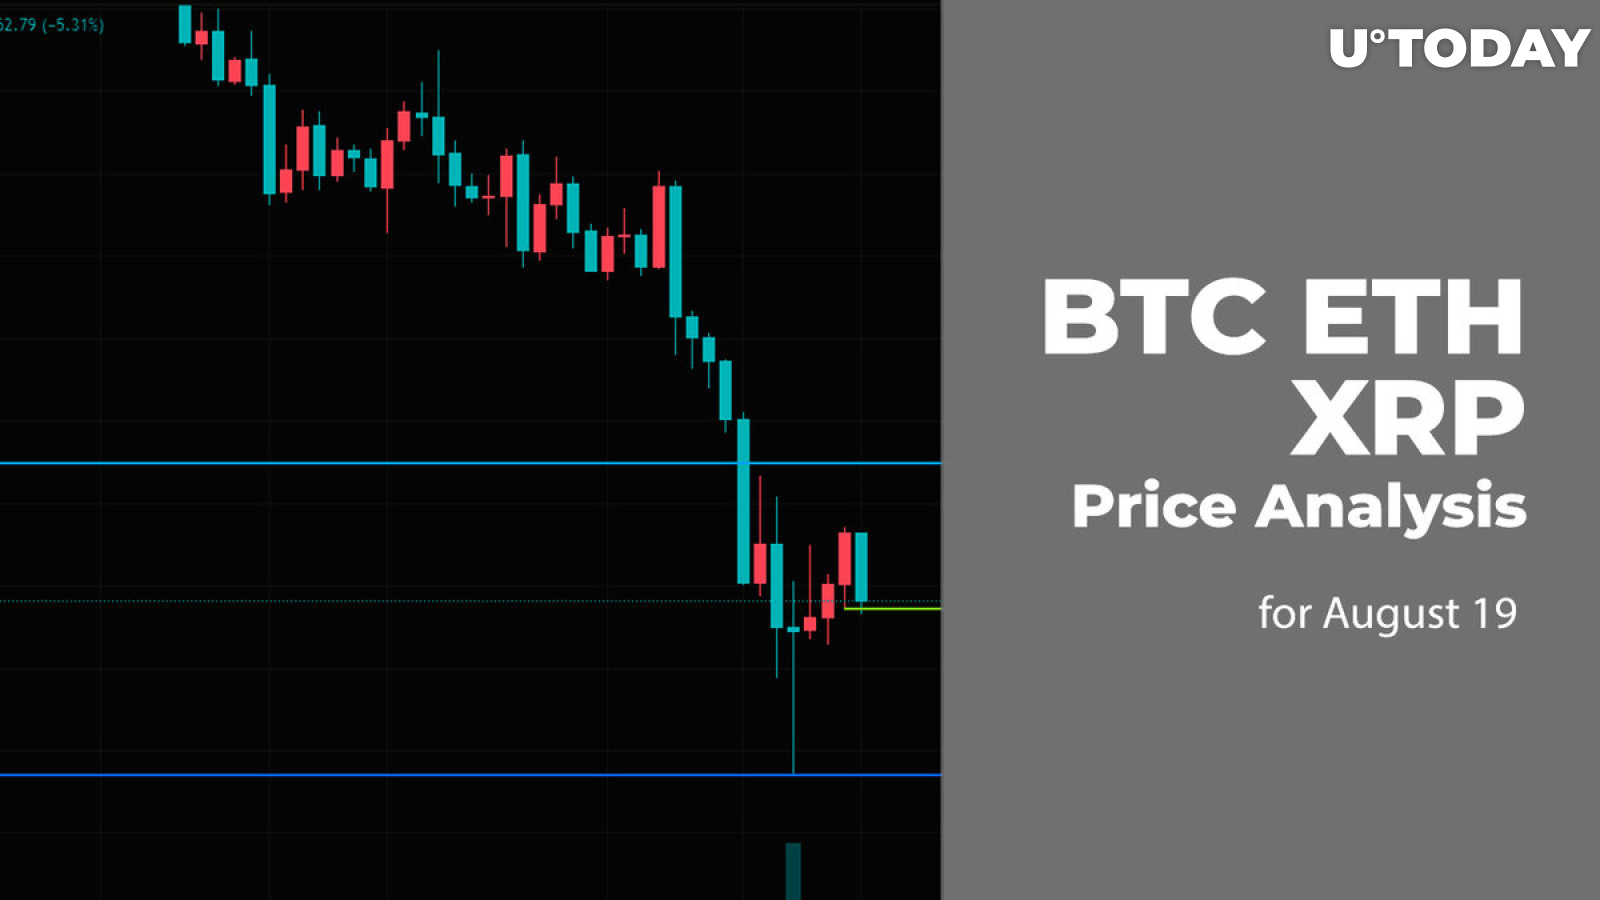 BTC, ETH, and XRP Price Analysis for August 19